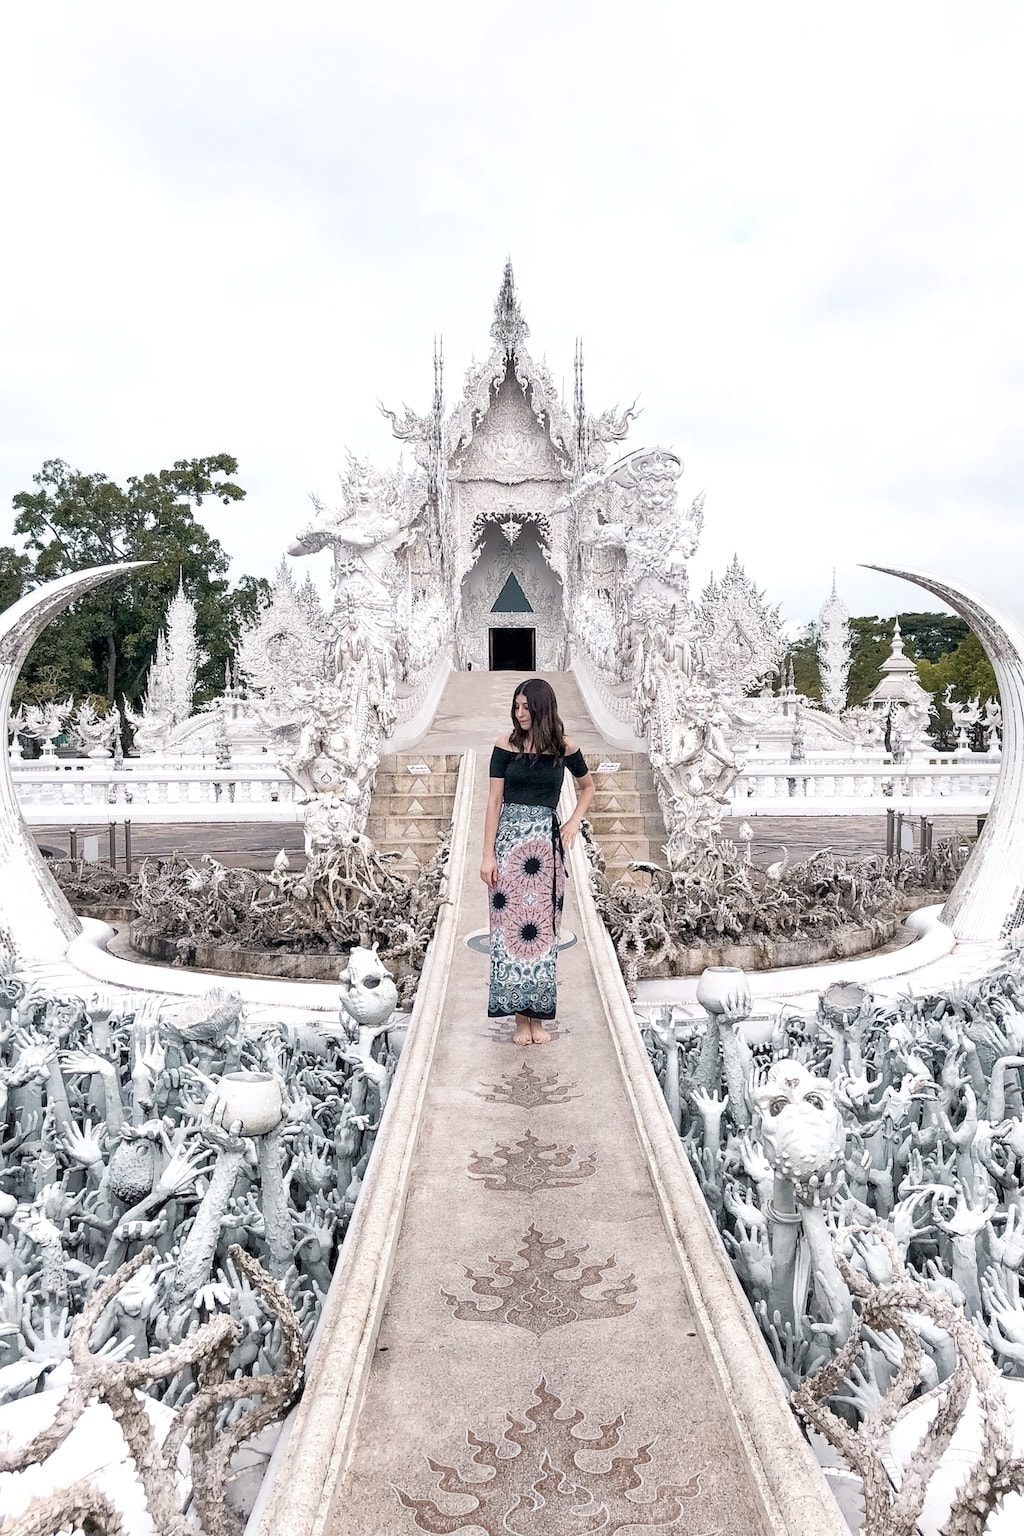 Things to Do in Chiang Mai: White Temple